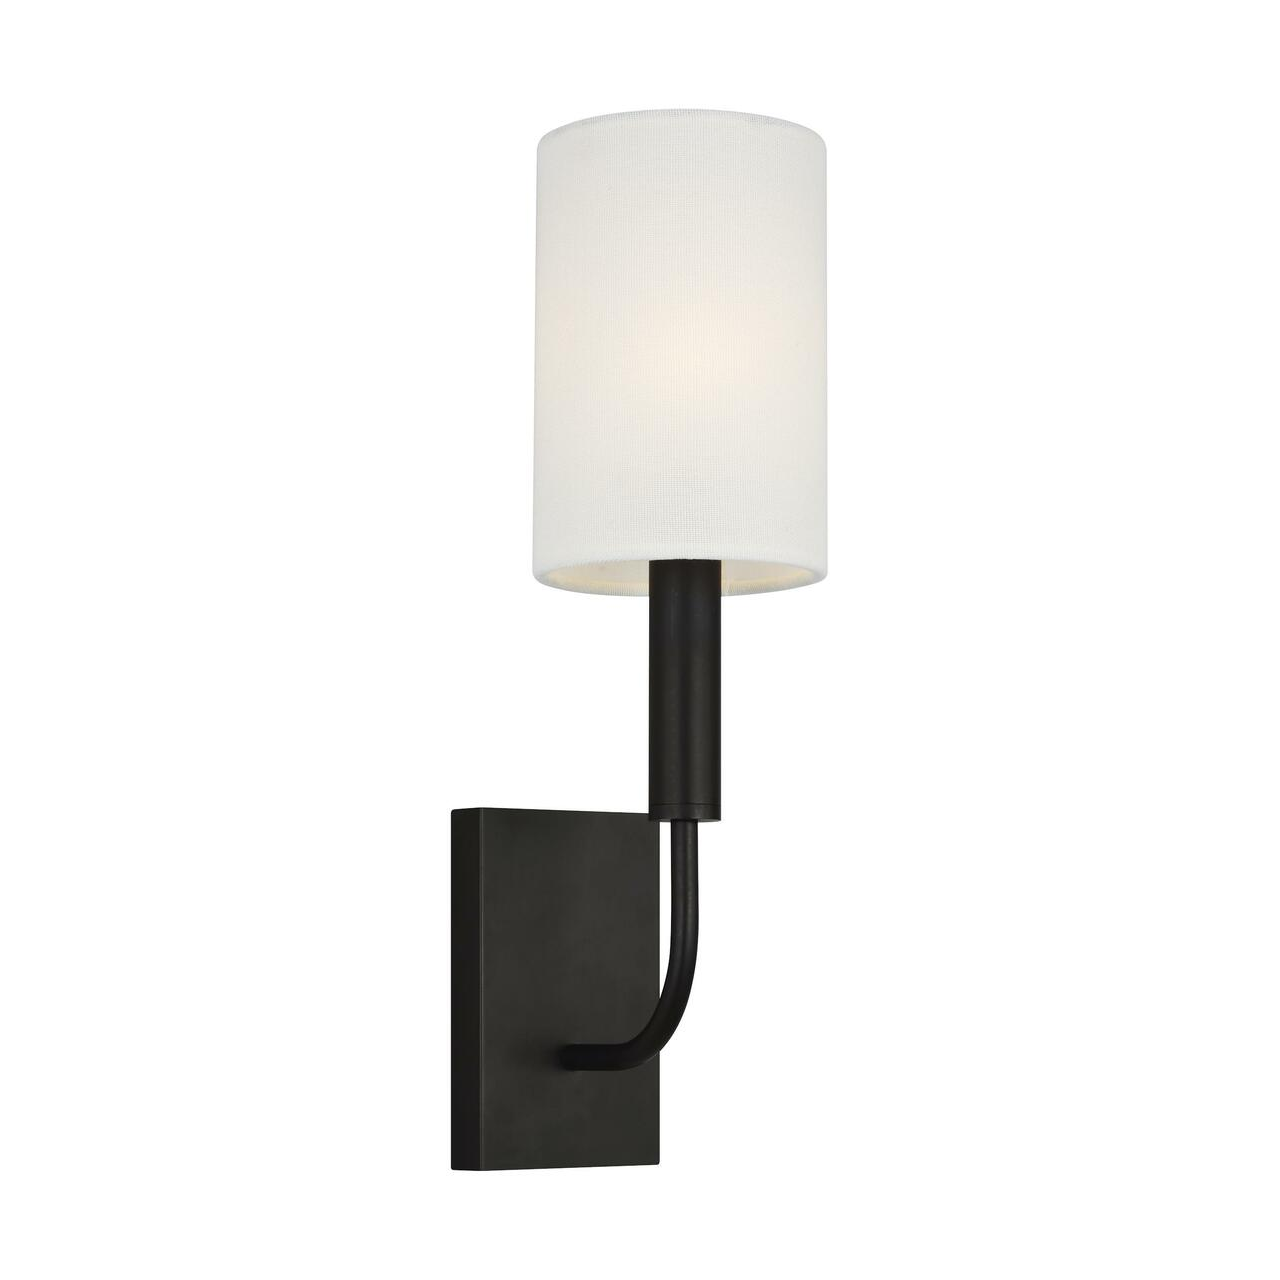 Product Image of Brianna Aged Iron Single Wall Light with Linen Shade